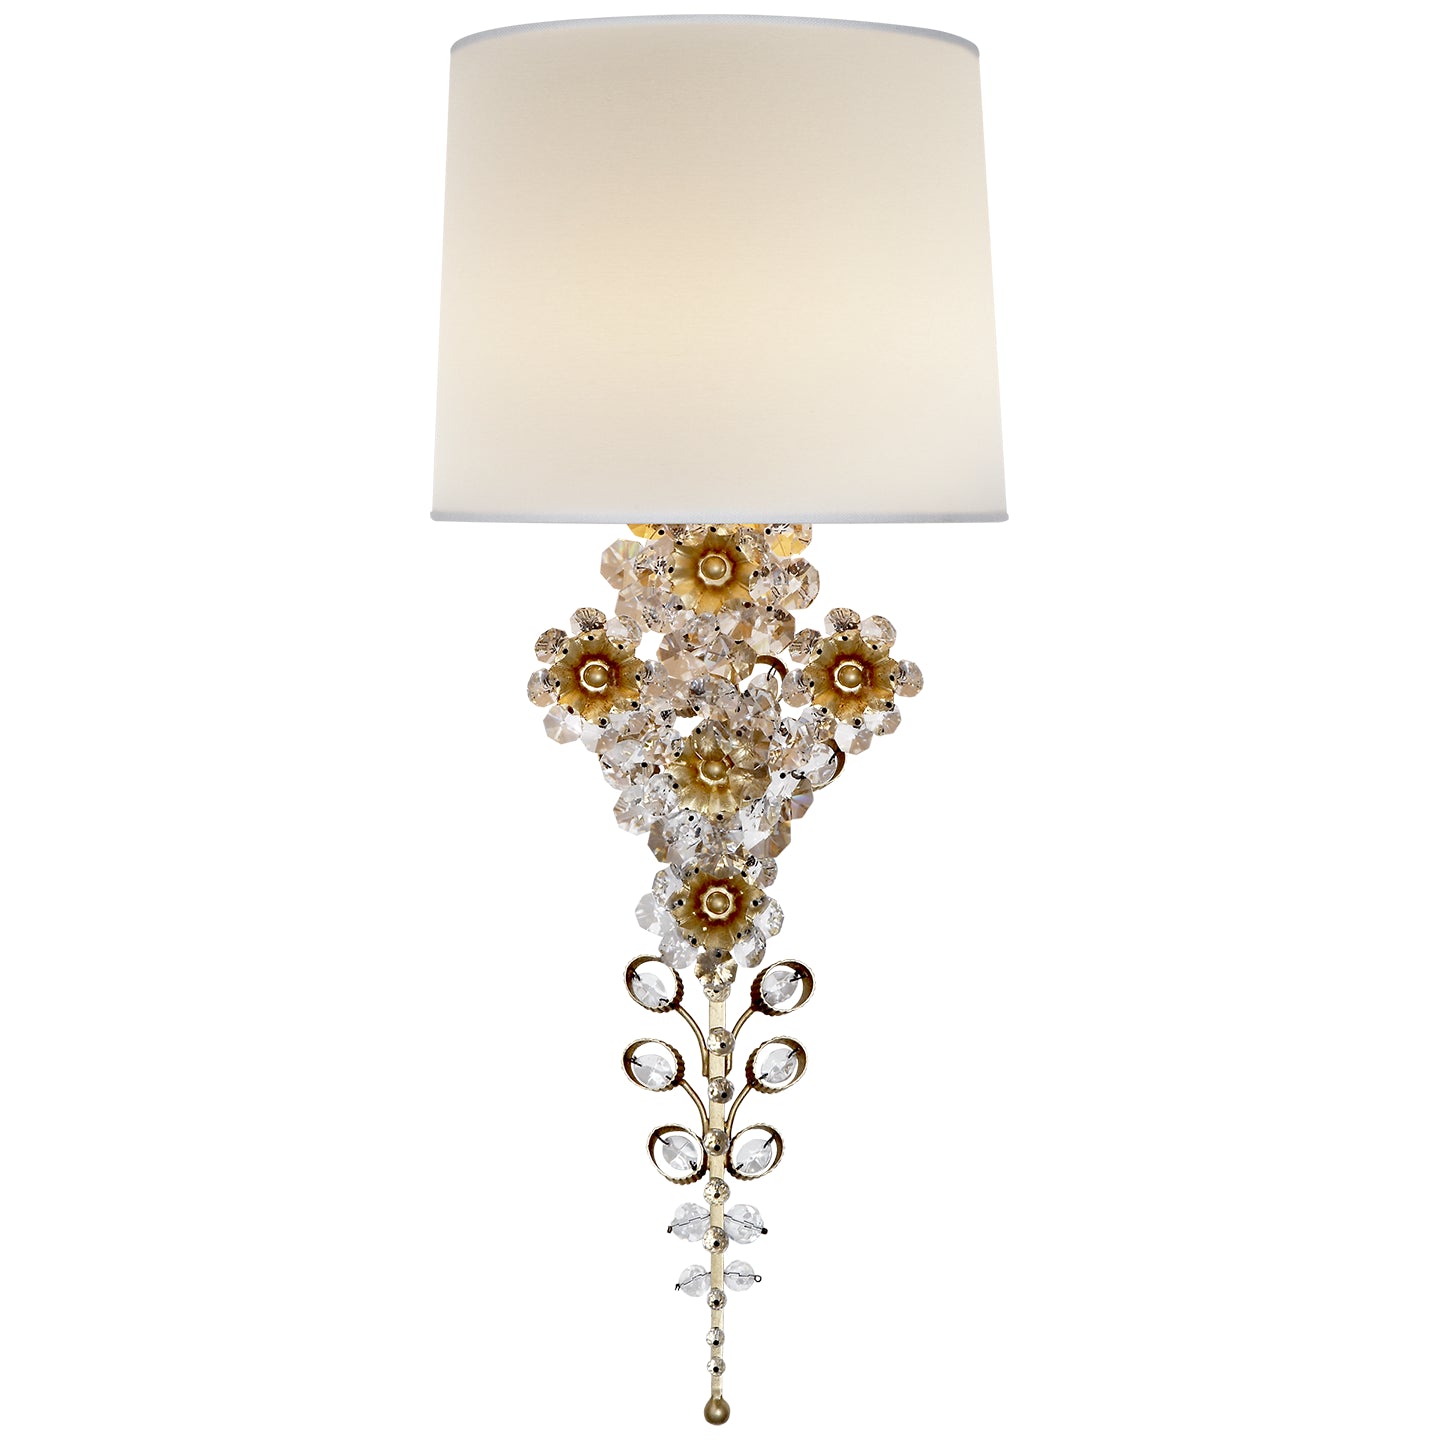 Load image into Gallery viewer, Visual Comfort Signature - ARN 2226G-L - One Light Wall Sconce - Claret - Gild
